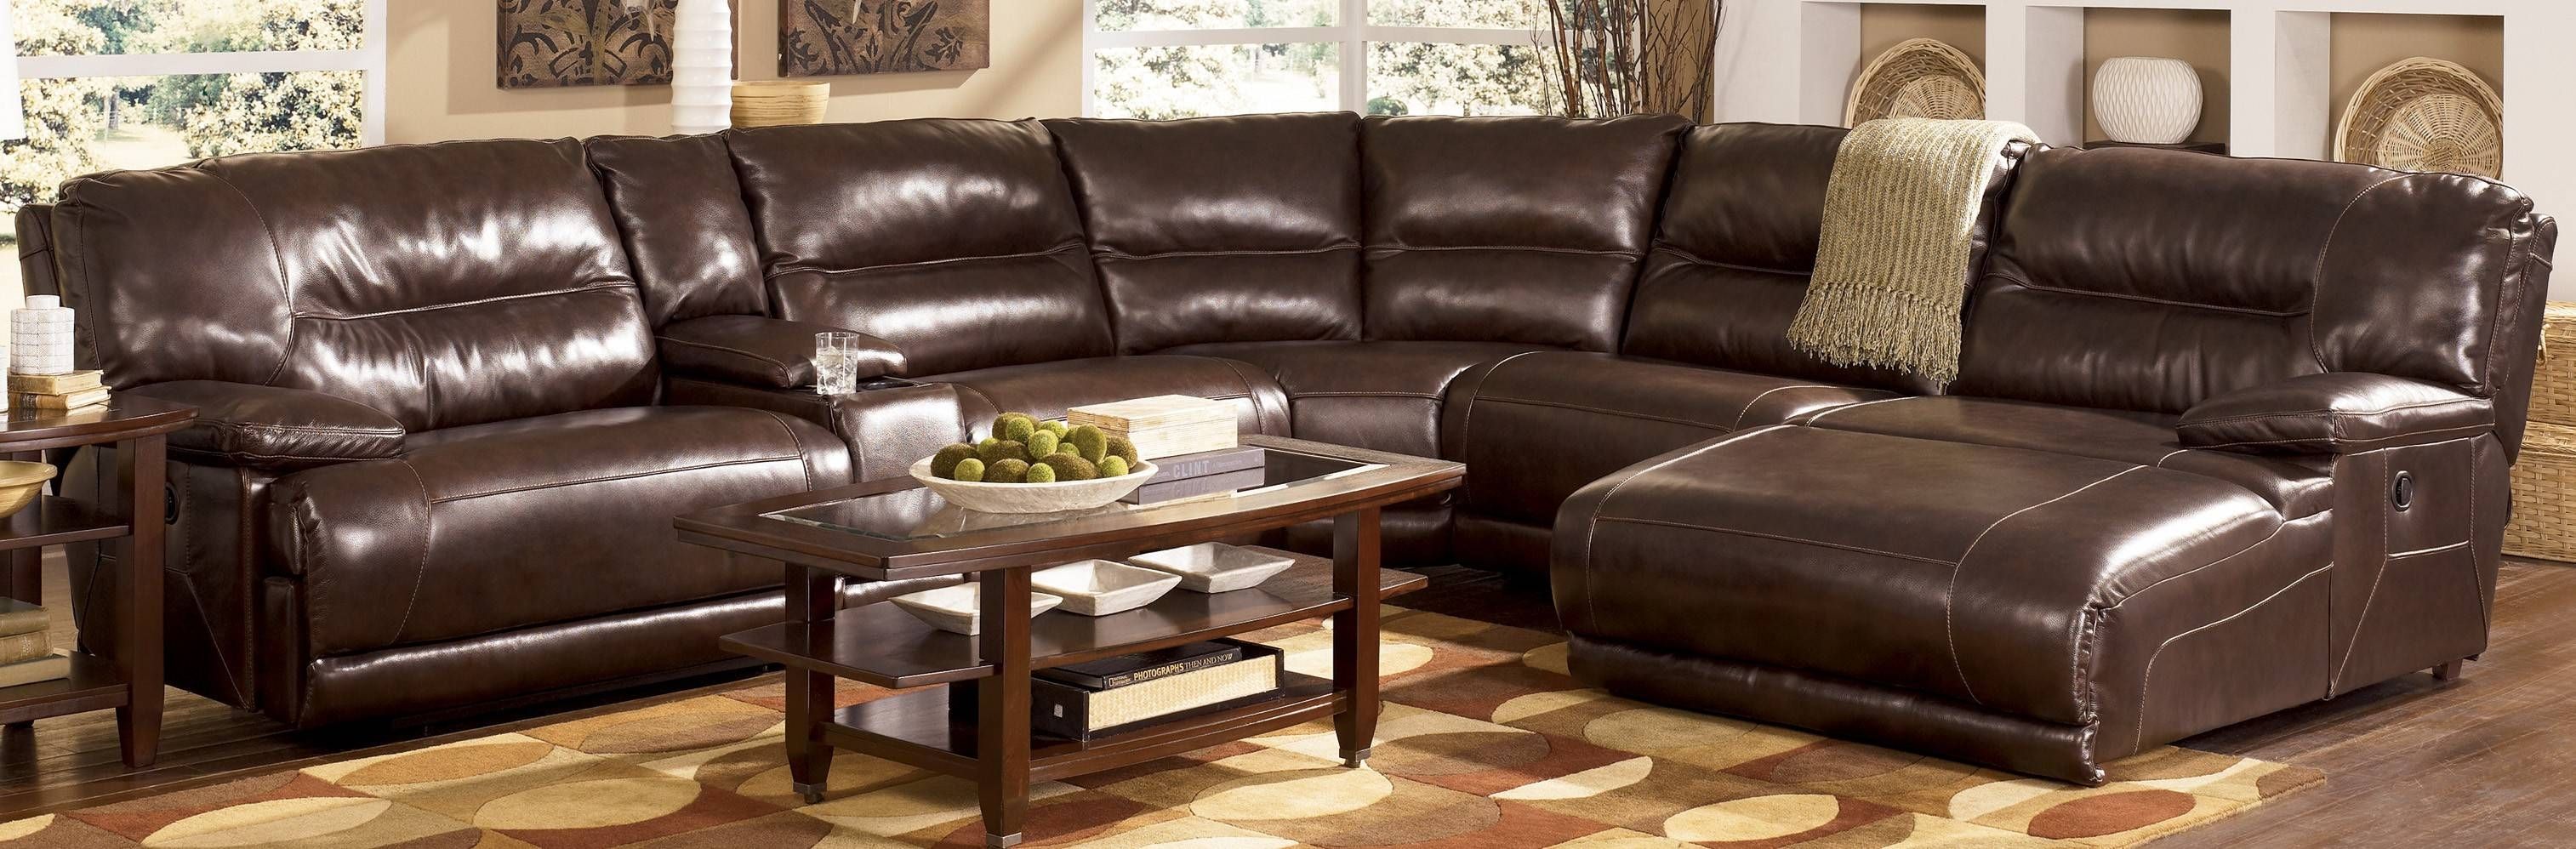 Sofas Center : Faux Leather Sectional Sofas Ikea Literarywondrous Intended For Faux Leather Sectional Sofas (Photo 7 of 25)